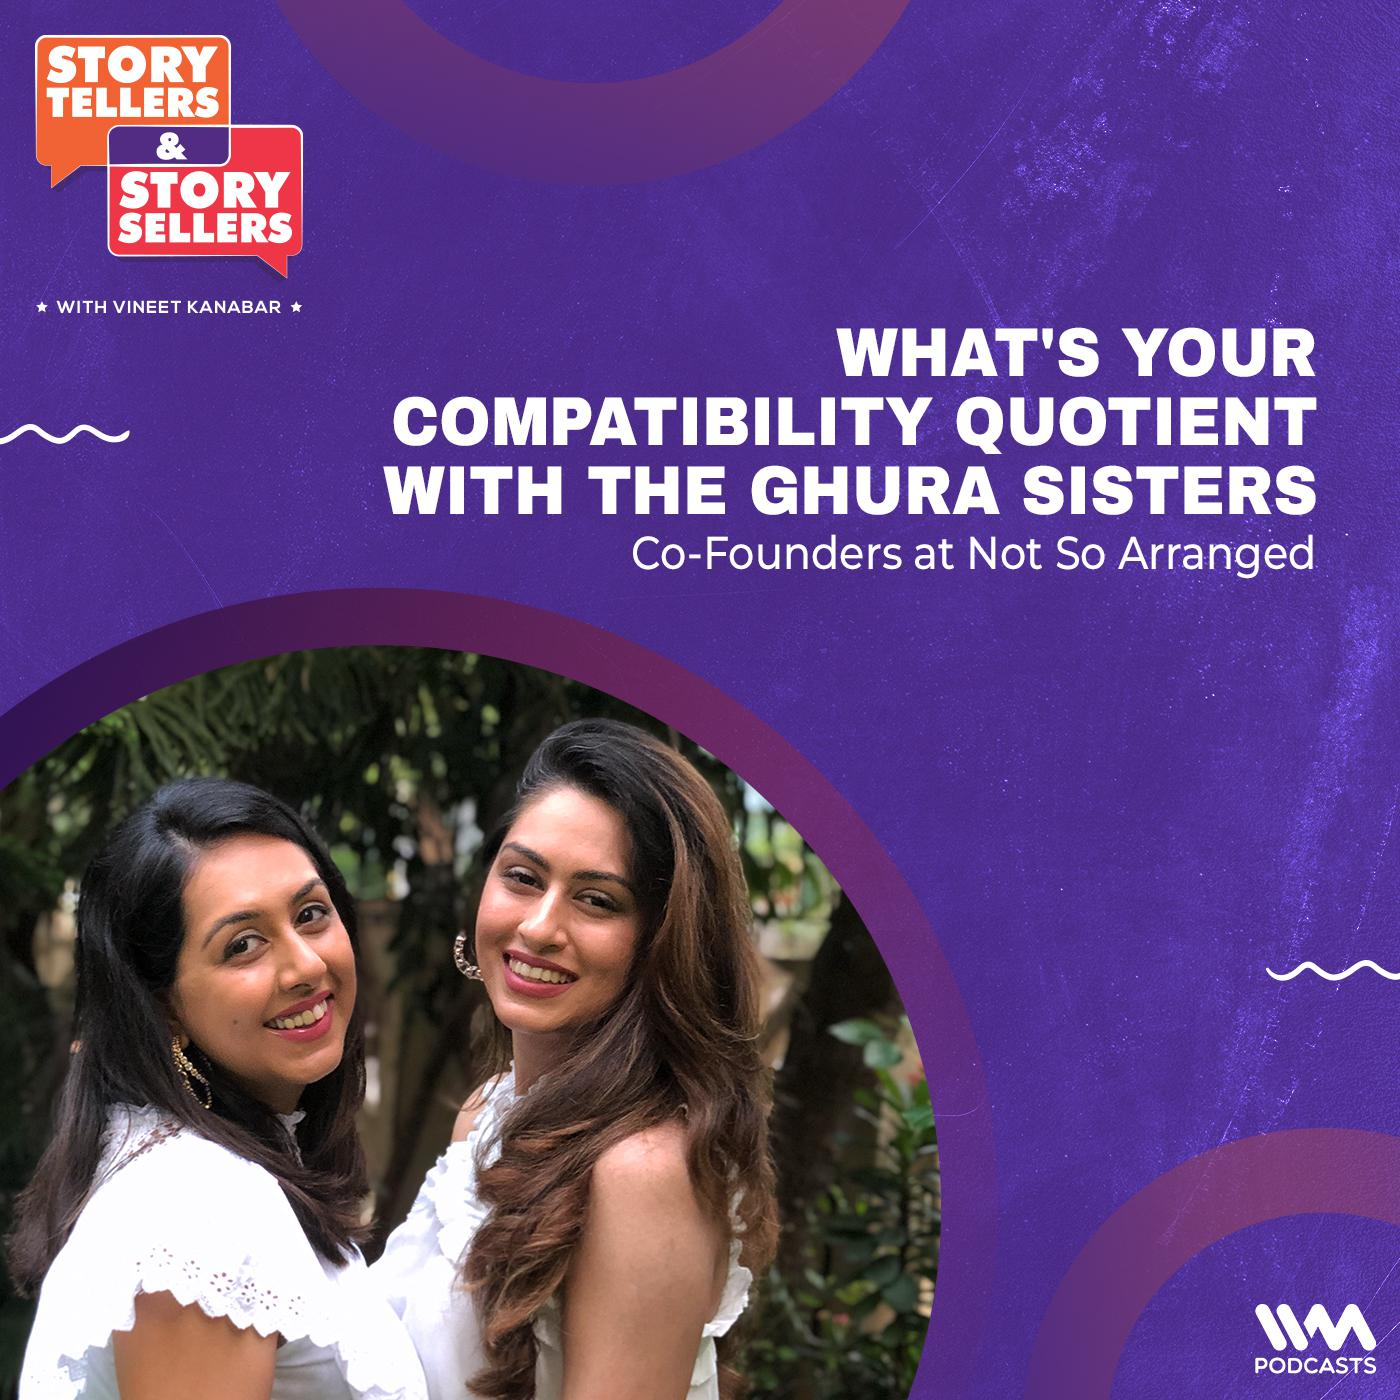 What's Your Compatibility Quotient with the Ghura Sisters